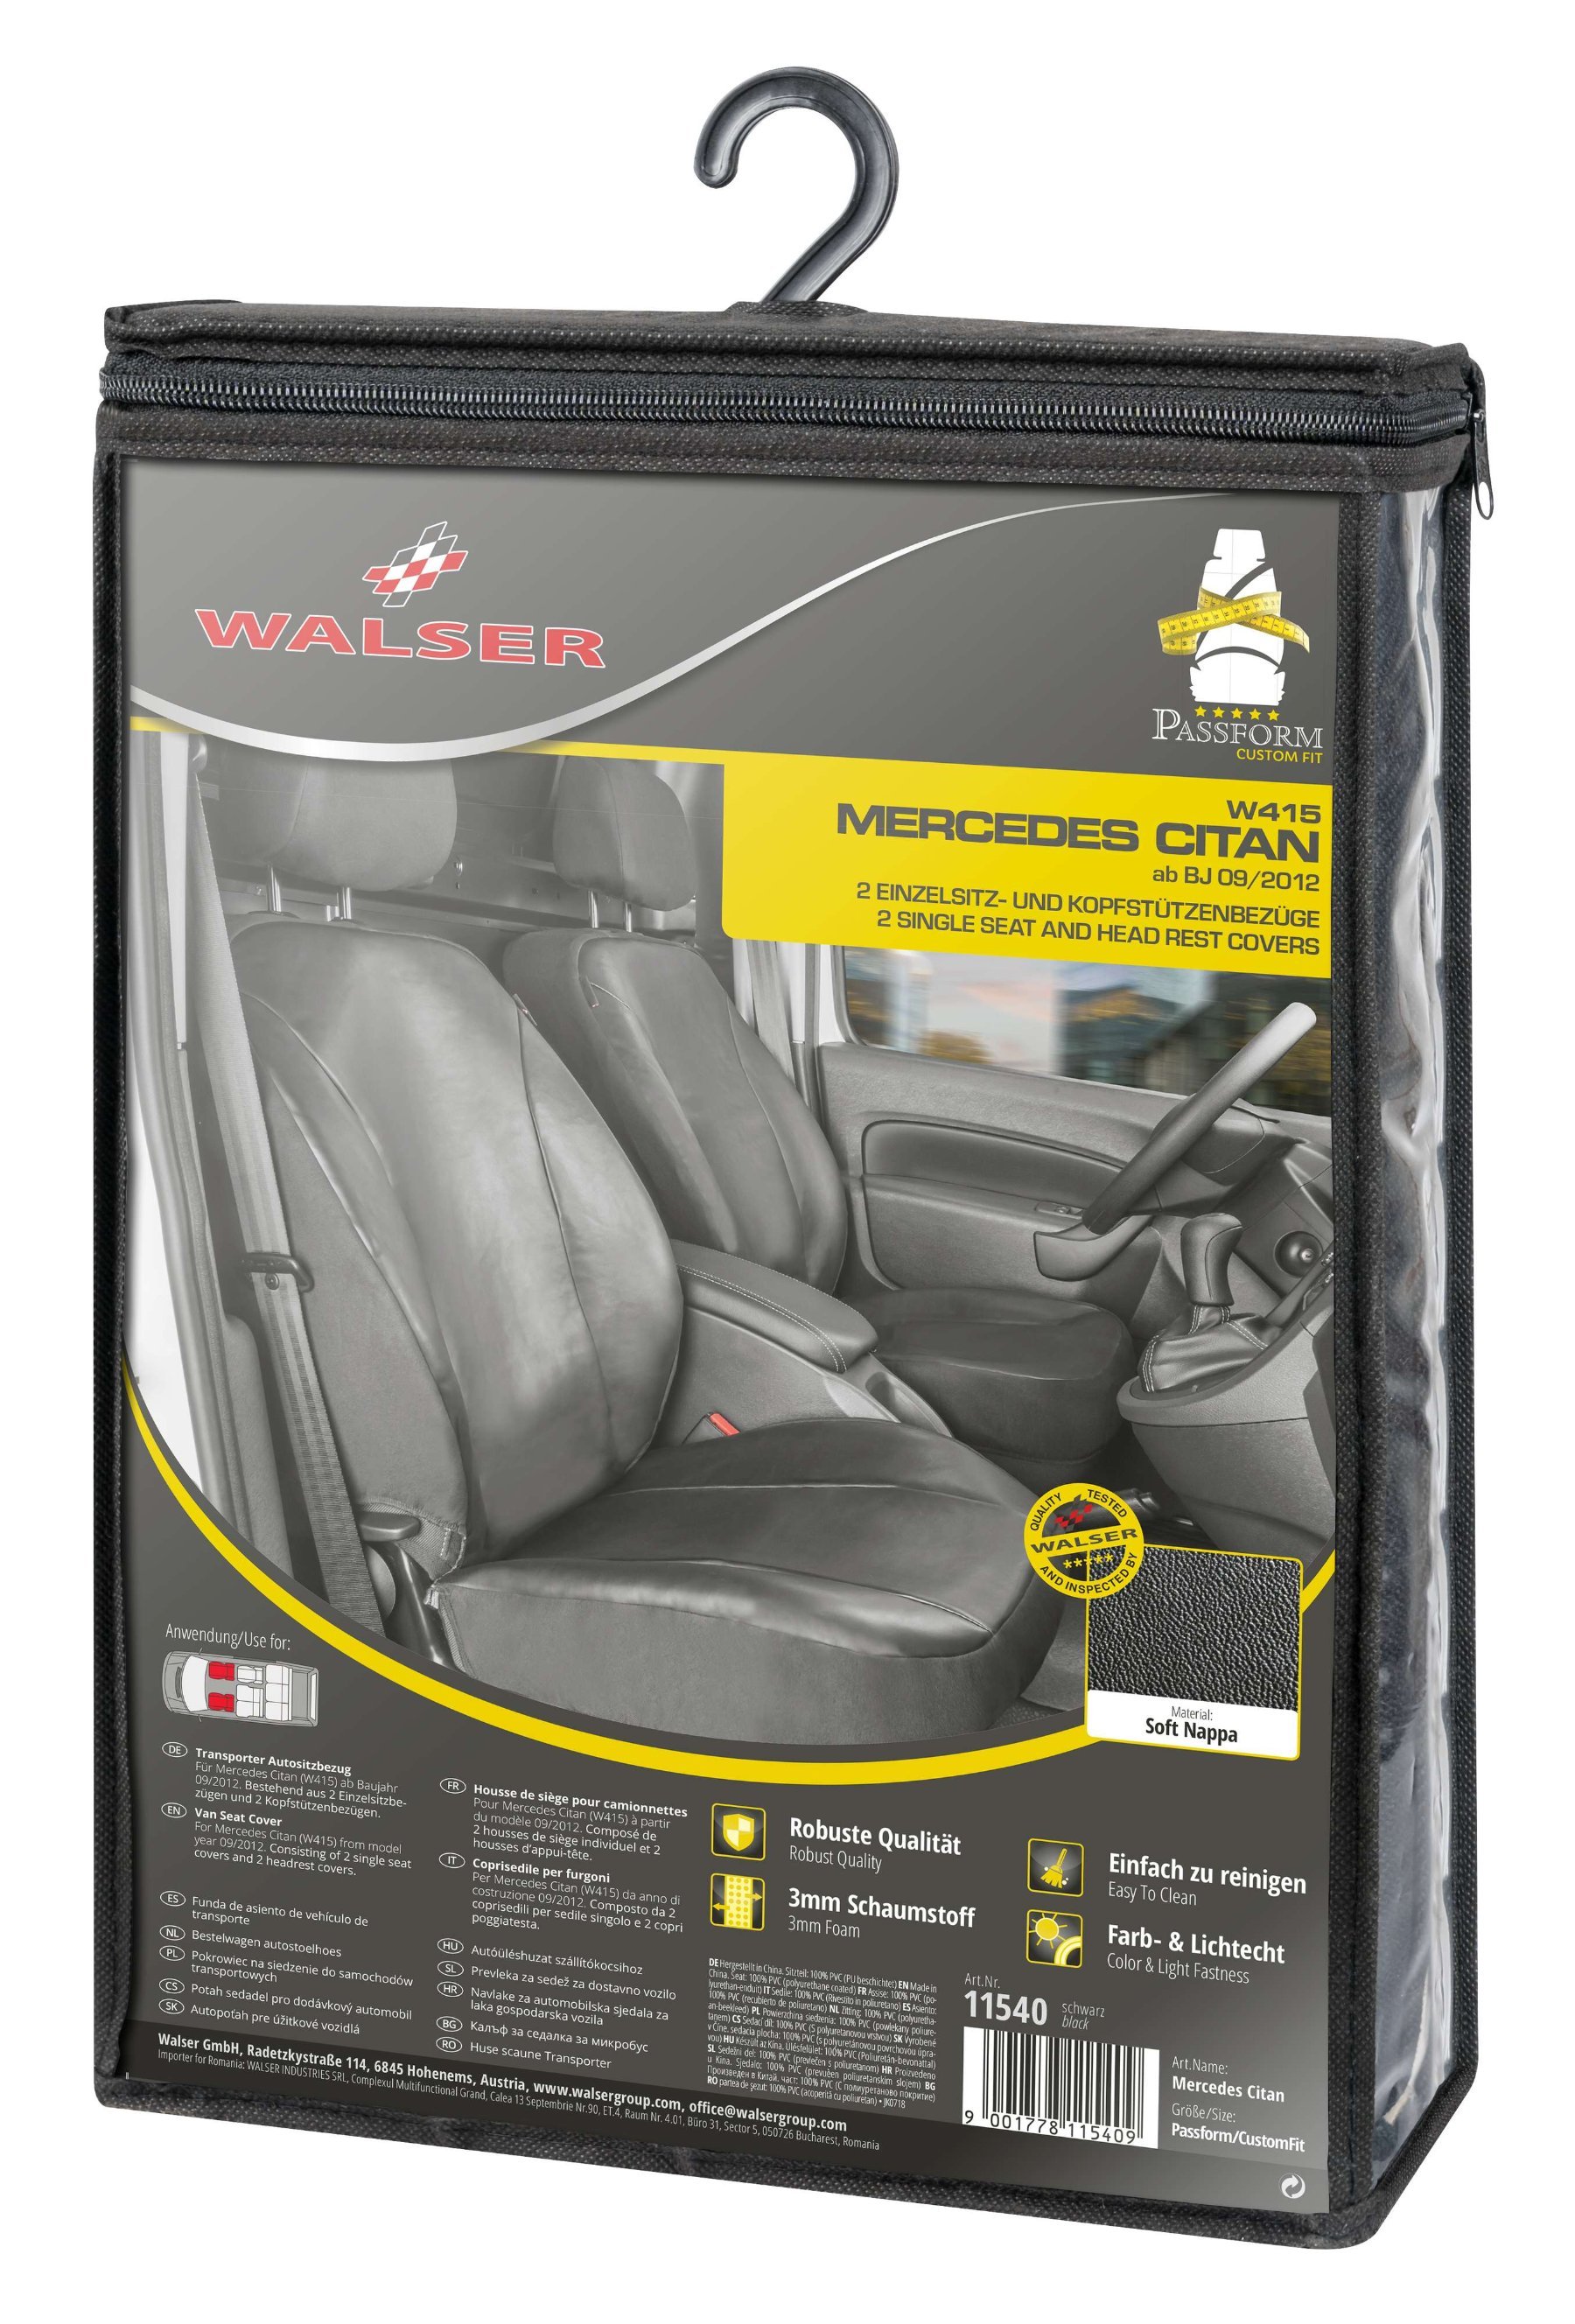 Seat cover made of imitation leather for Mercedes-Benz Citan W415, 2 single seat covers front